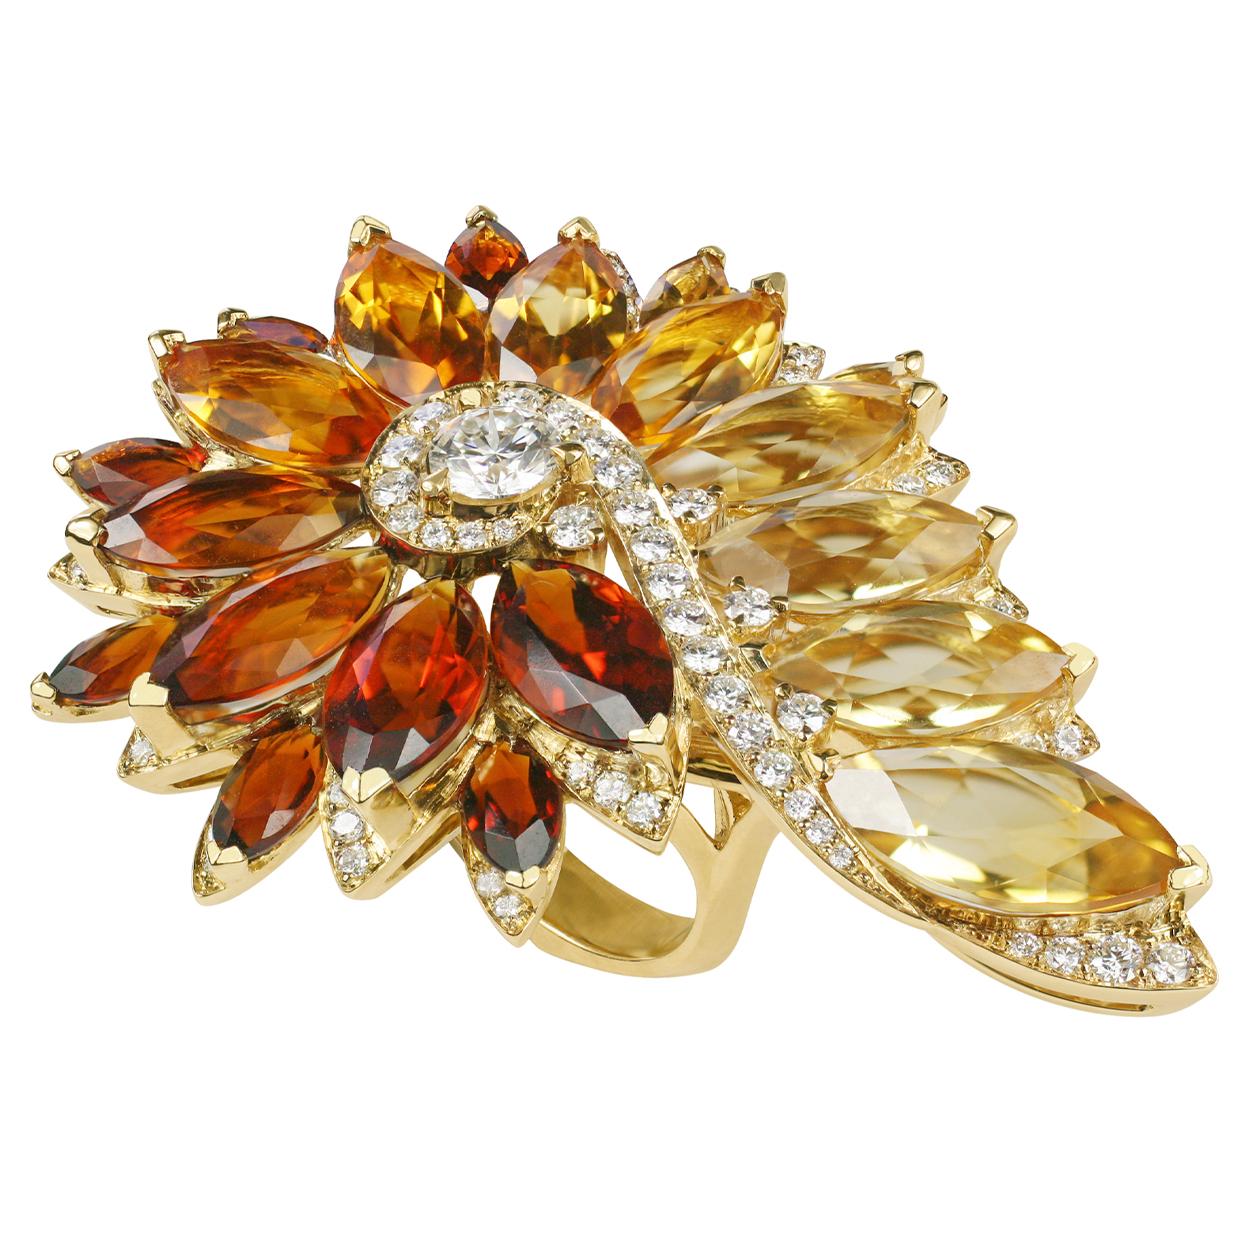 Magnipheasant Feathers Cocktail Ring set in 18ct yellow Gold with white Diamond pavé (0.62ct), a single white Diamond centre stone (0.31ct), and solid Citrine (12.19ct).

Available in US ring size 7.

Built on a foundation of 40 years of technical